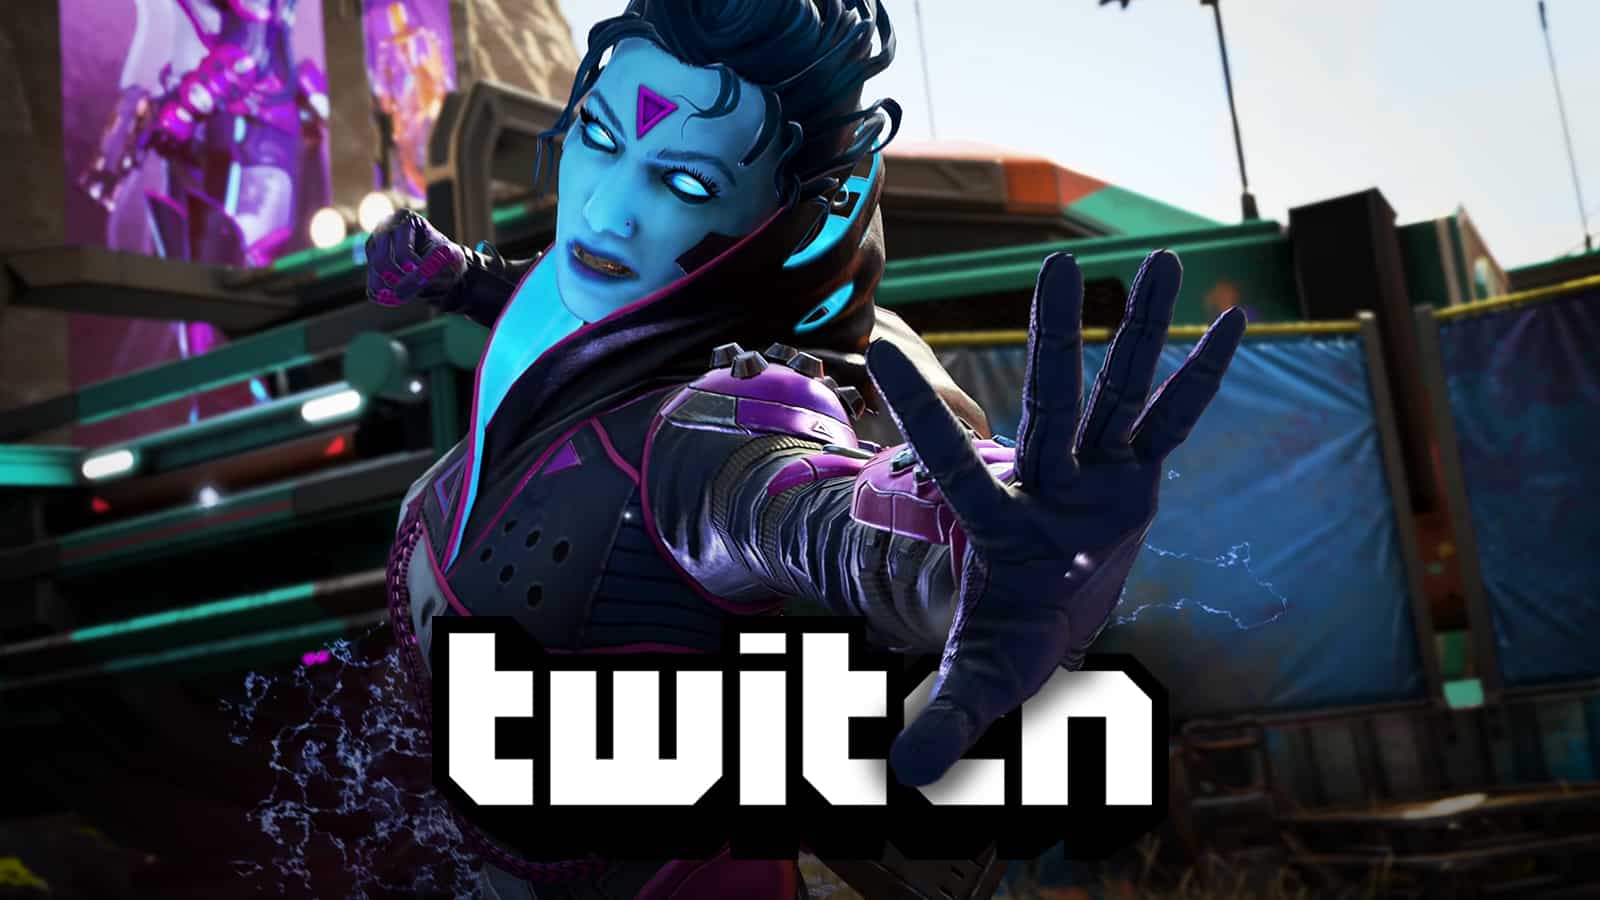 Wraith from Apex Legends punches over Twitch logo.